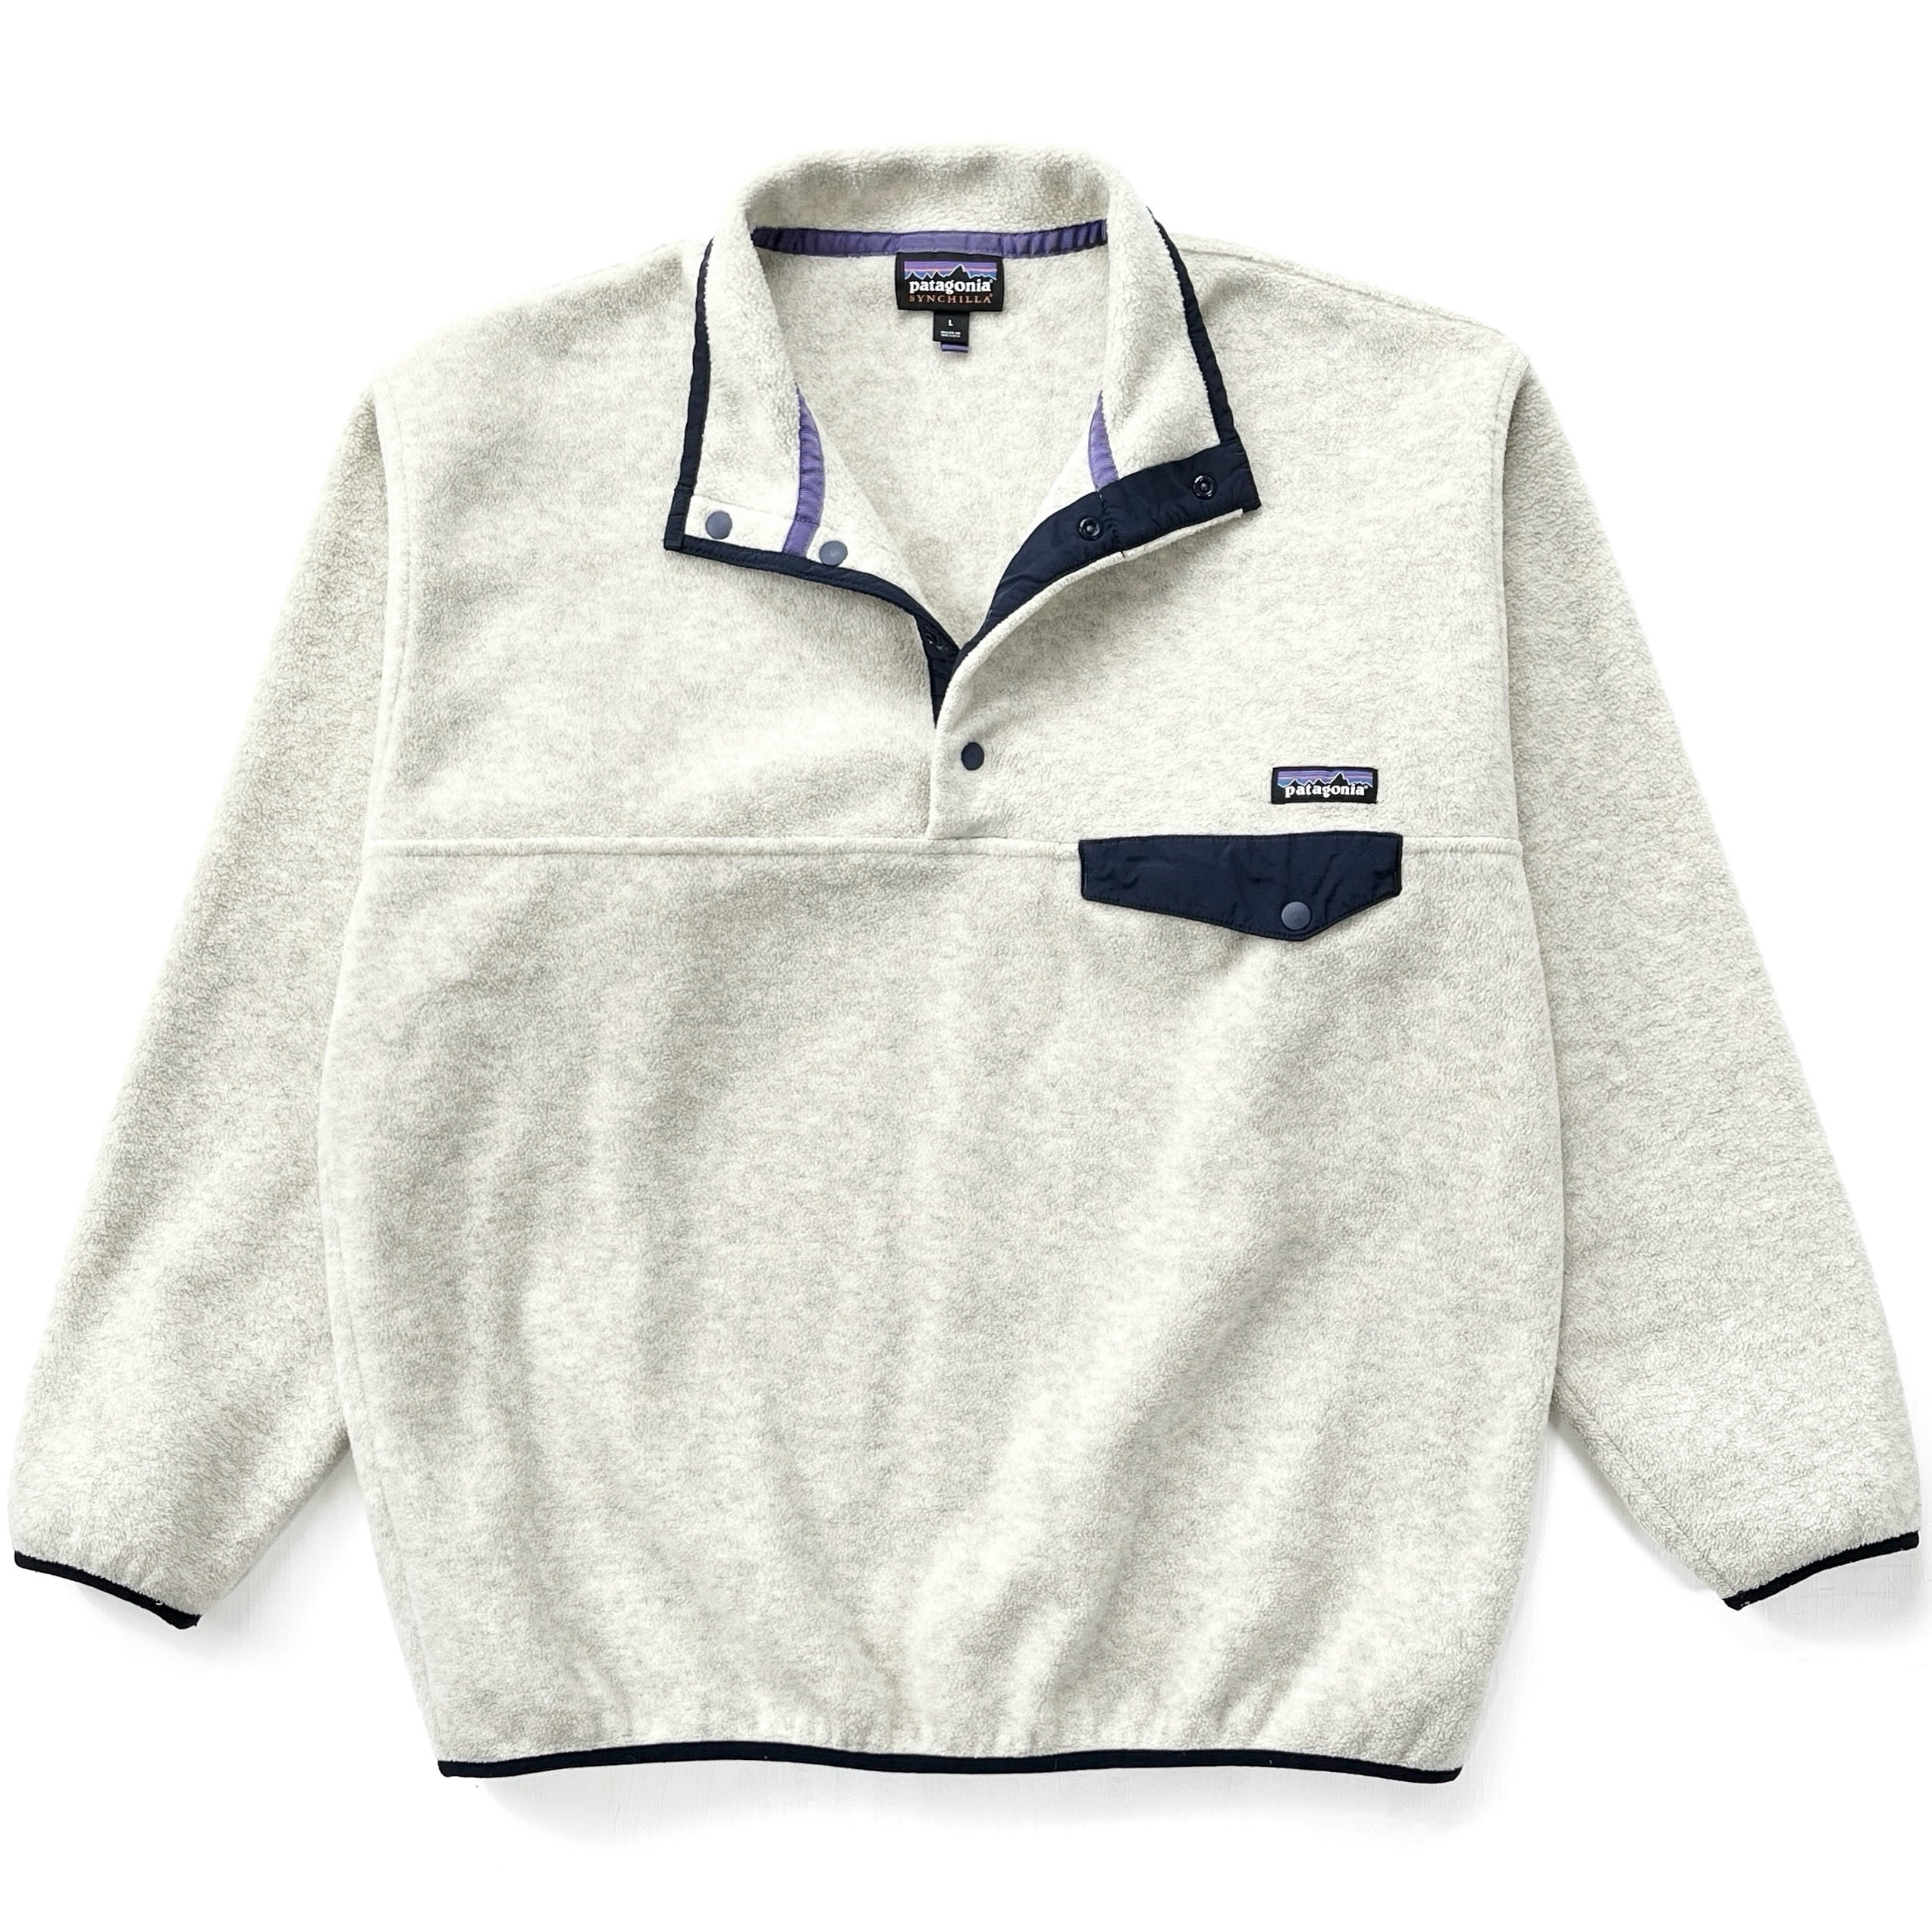 2015 Patagonia Synchilla Snap-T Pullover, Oatmeal Heather (L)